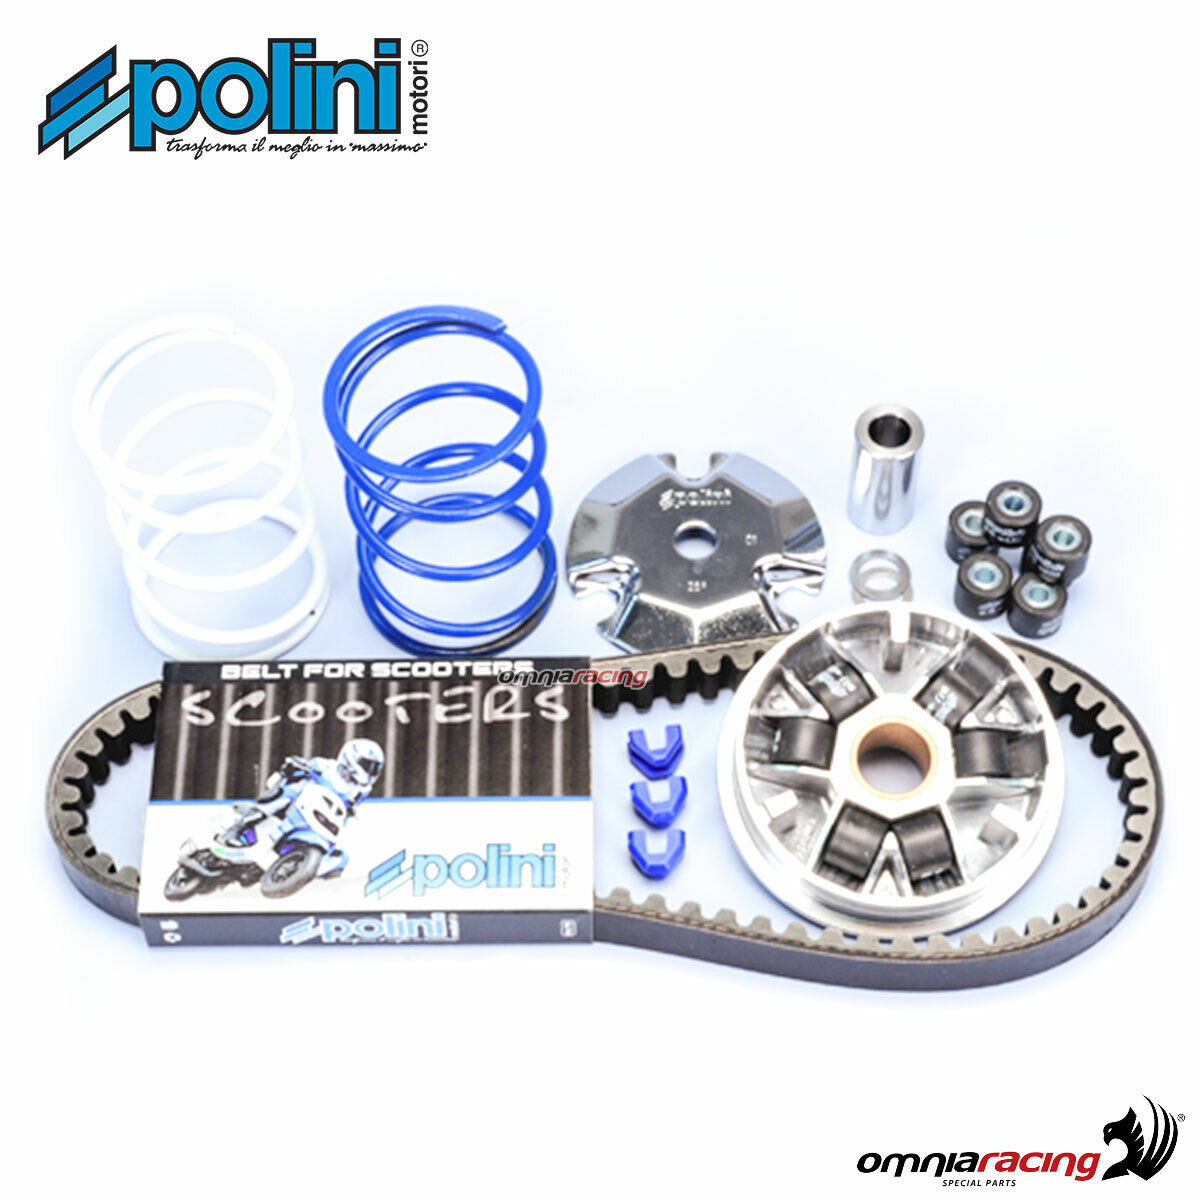 Polini variator kit for online shopping Honda air 2T Shadow cooled Limited time free shipping 50